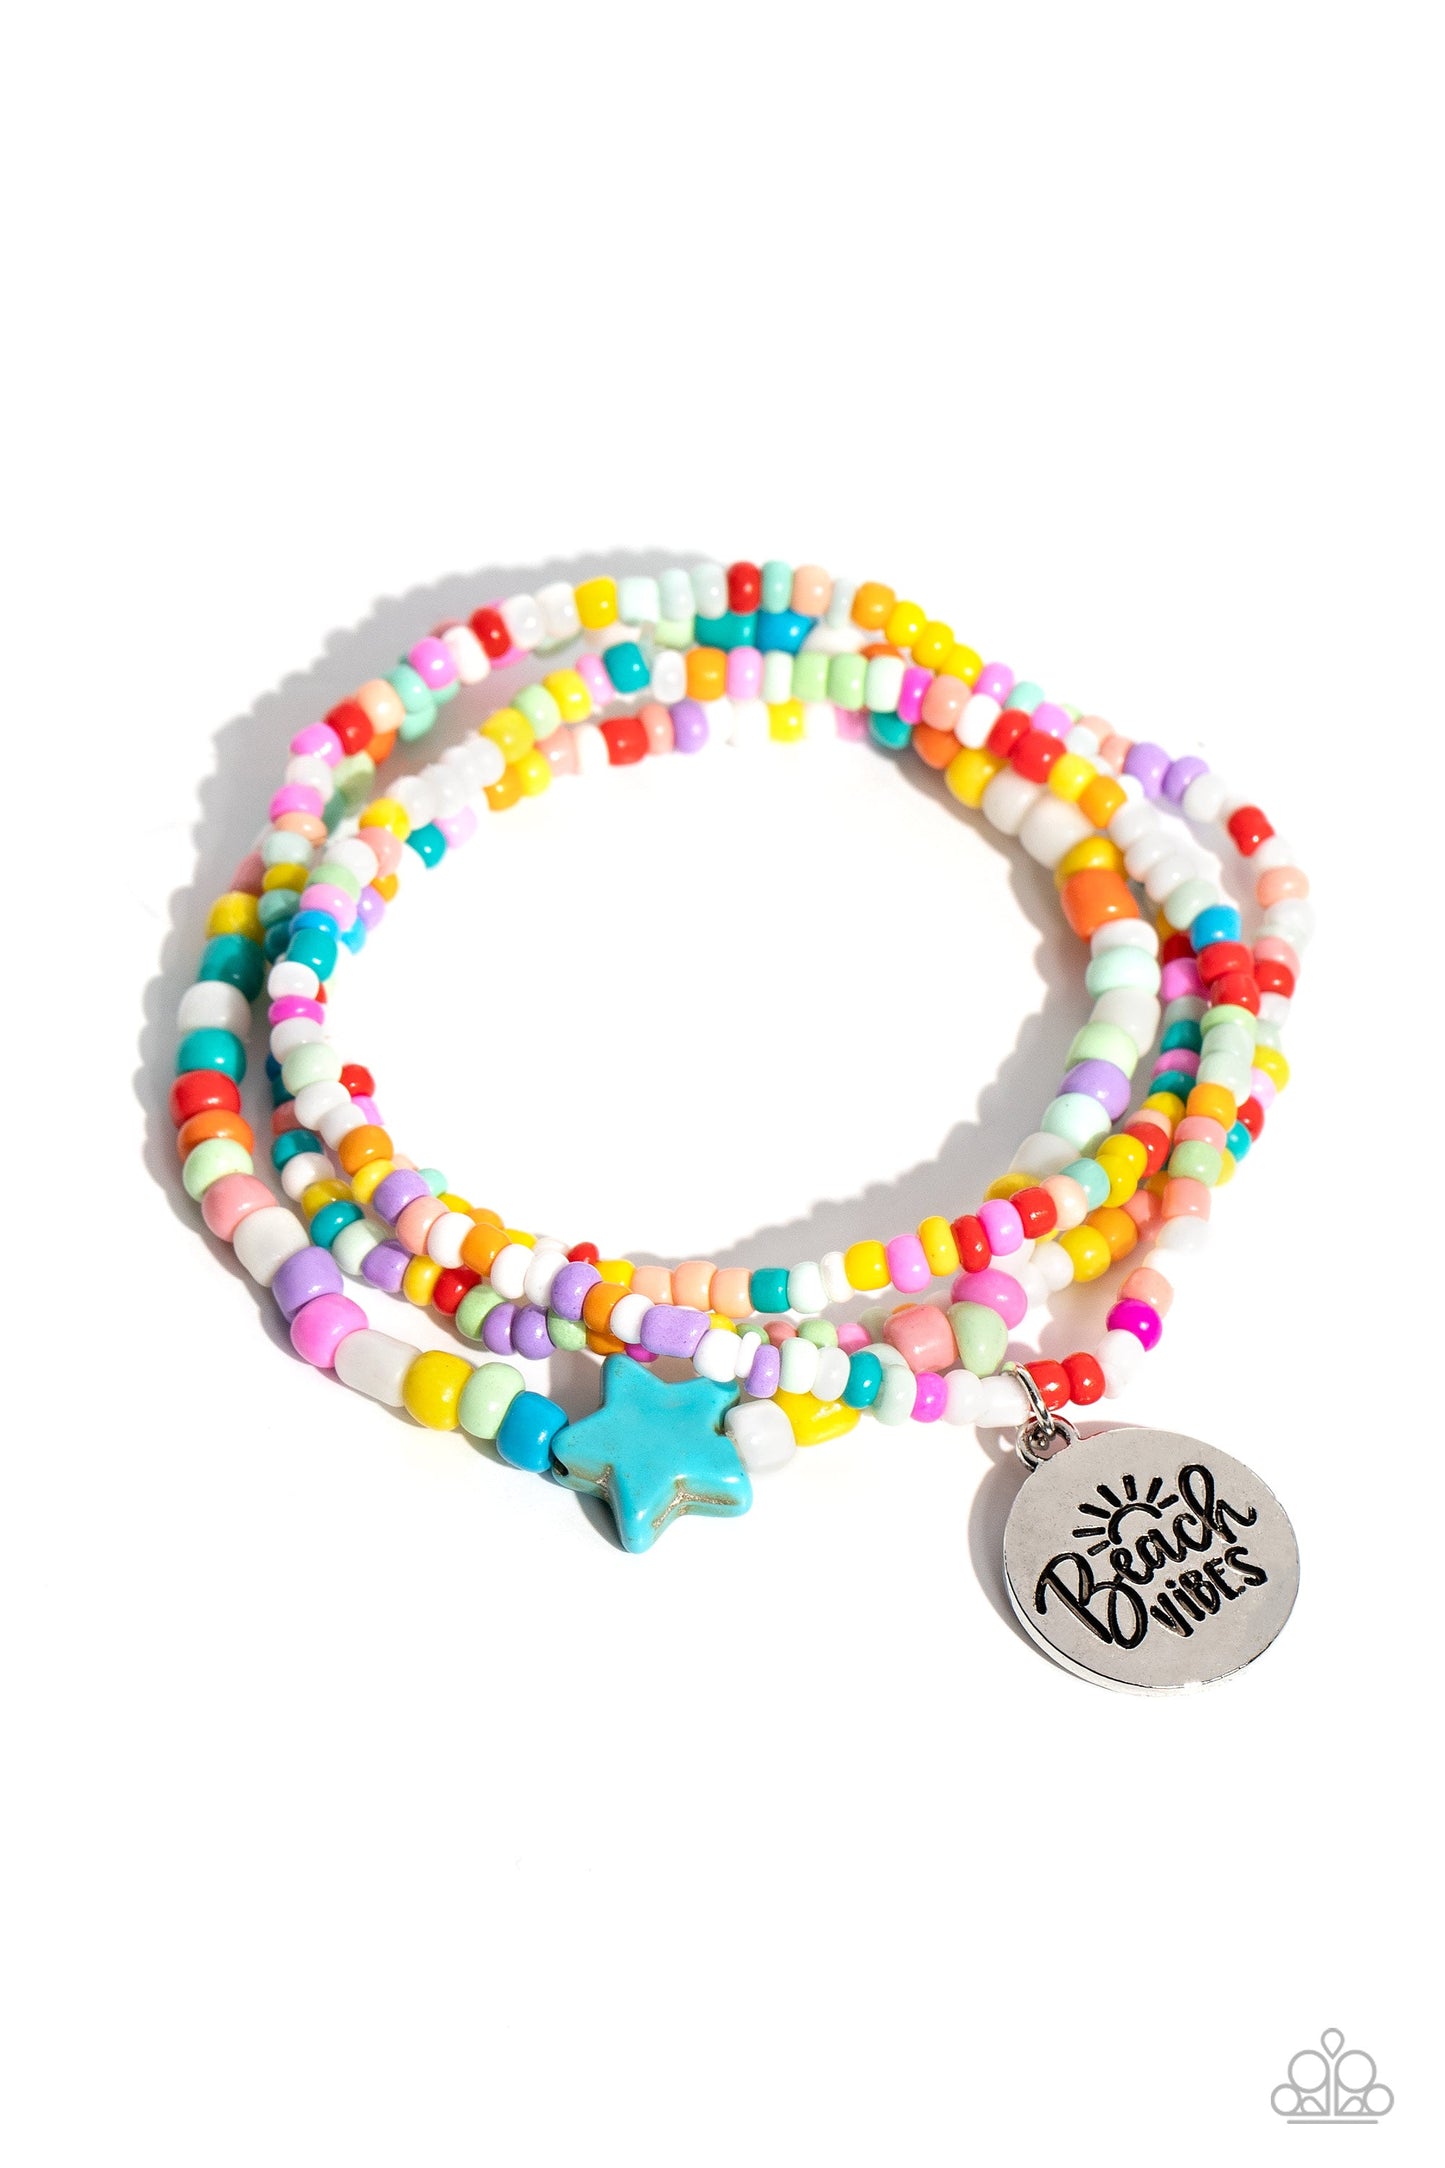 Wave Riding - Multi Color Bracelet - Paparazzi Accessories - Multicolored seed beads wrap around the wrist on elastic stretchy bands for a vivacious pop of color. A turquoise stone star is infused on one of the strands, adding an earthy flourish to the design, while a silver disc stamped with a sun embellishment and the phrase "Beach Vibes".